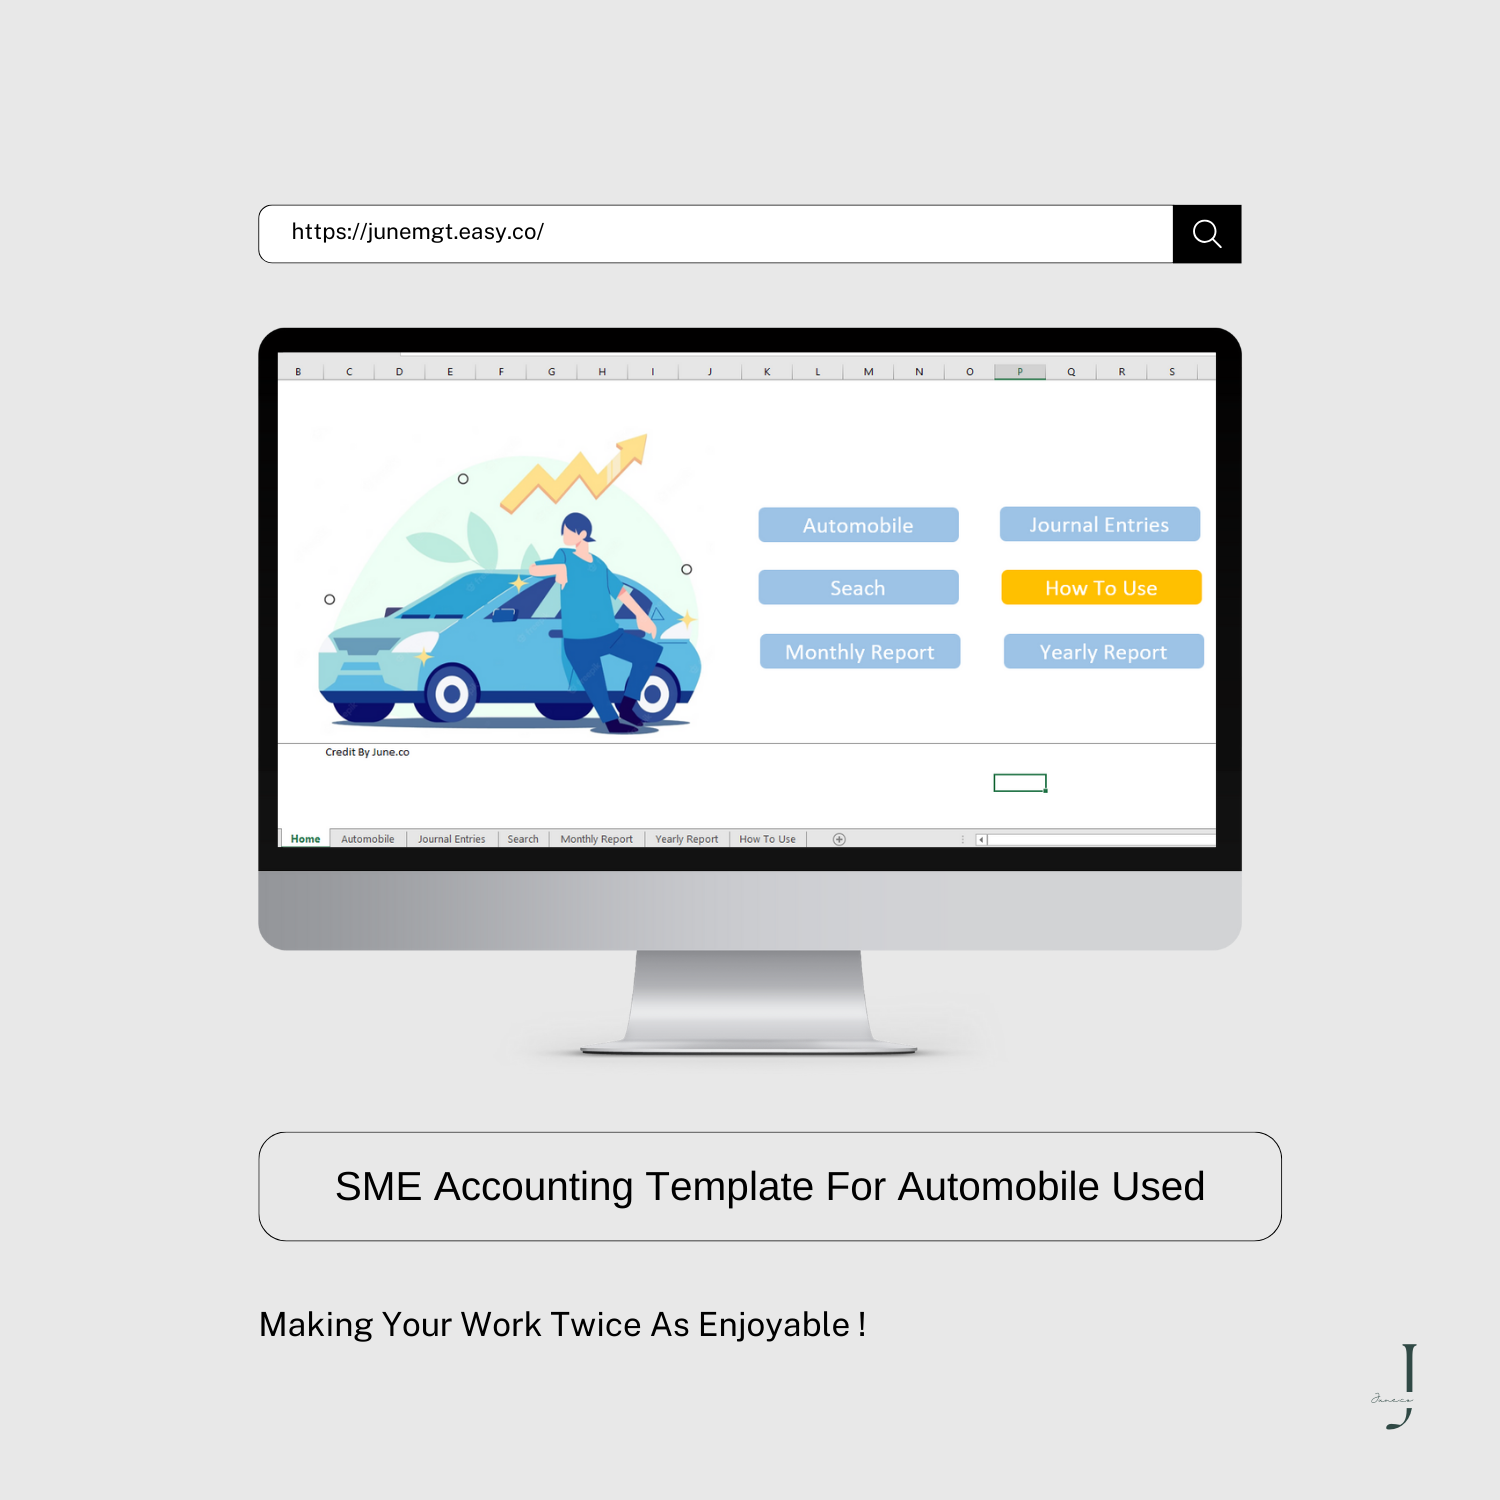 SME Accounting Template For Automobile Used product